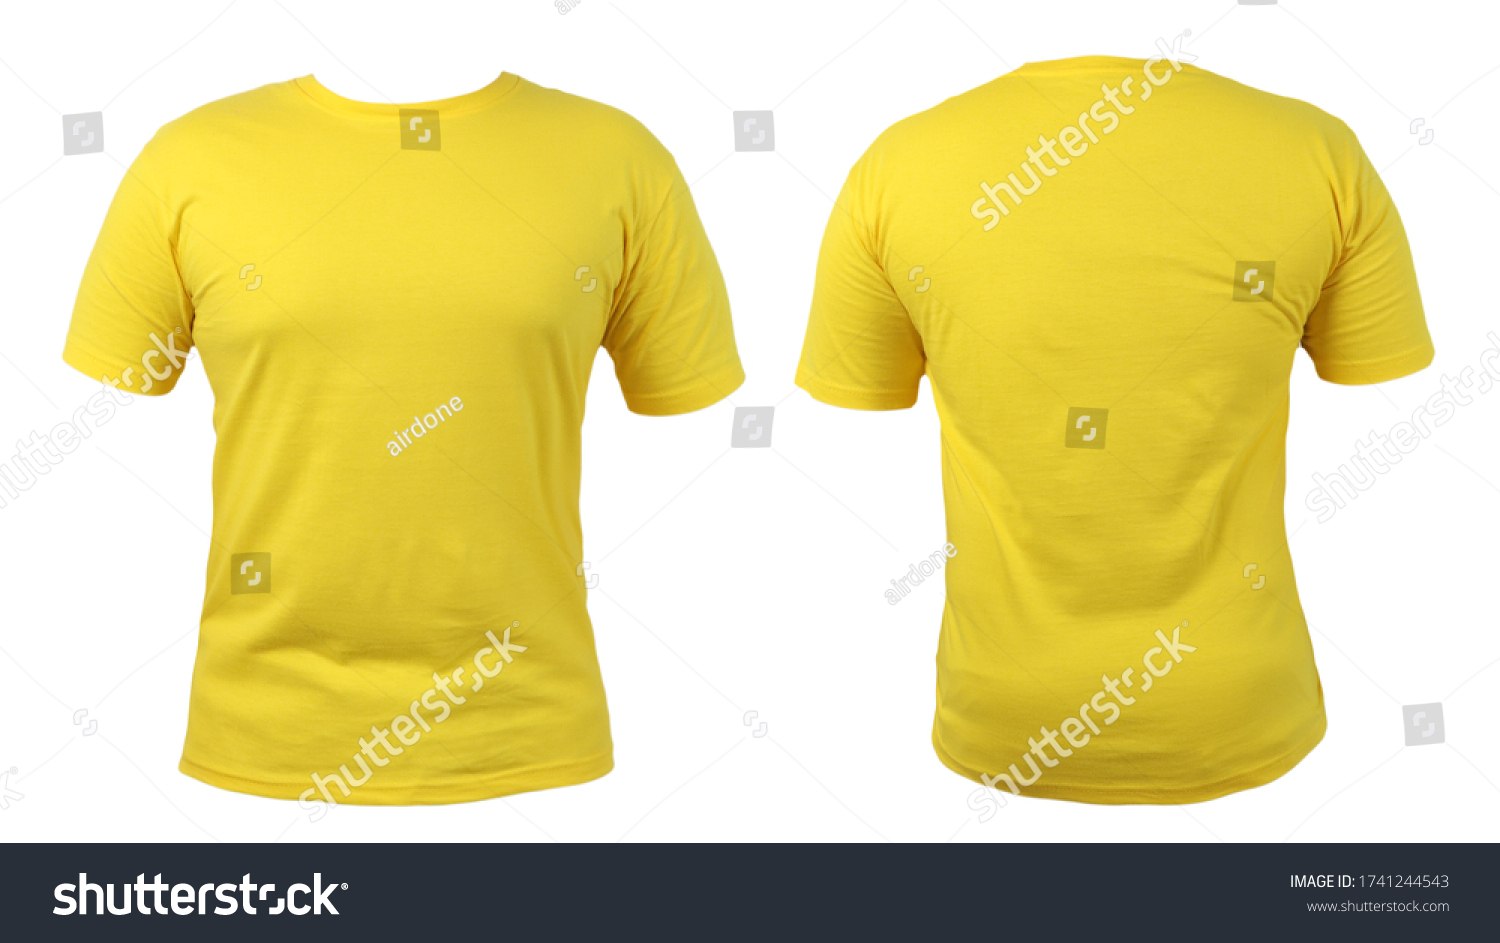 Yellow Tshirt Mock Front Back View Stock Photo 1741244543 | Shutterstock